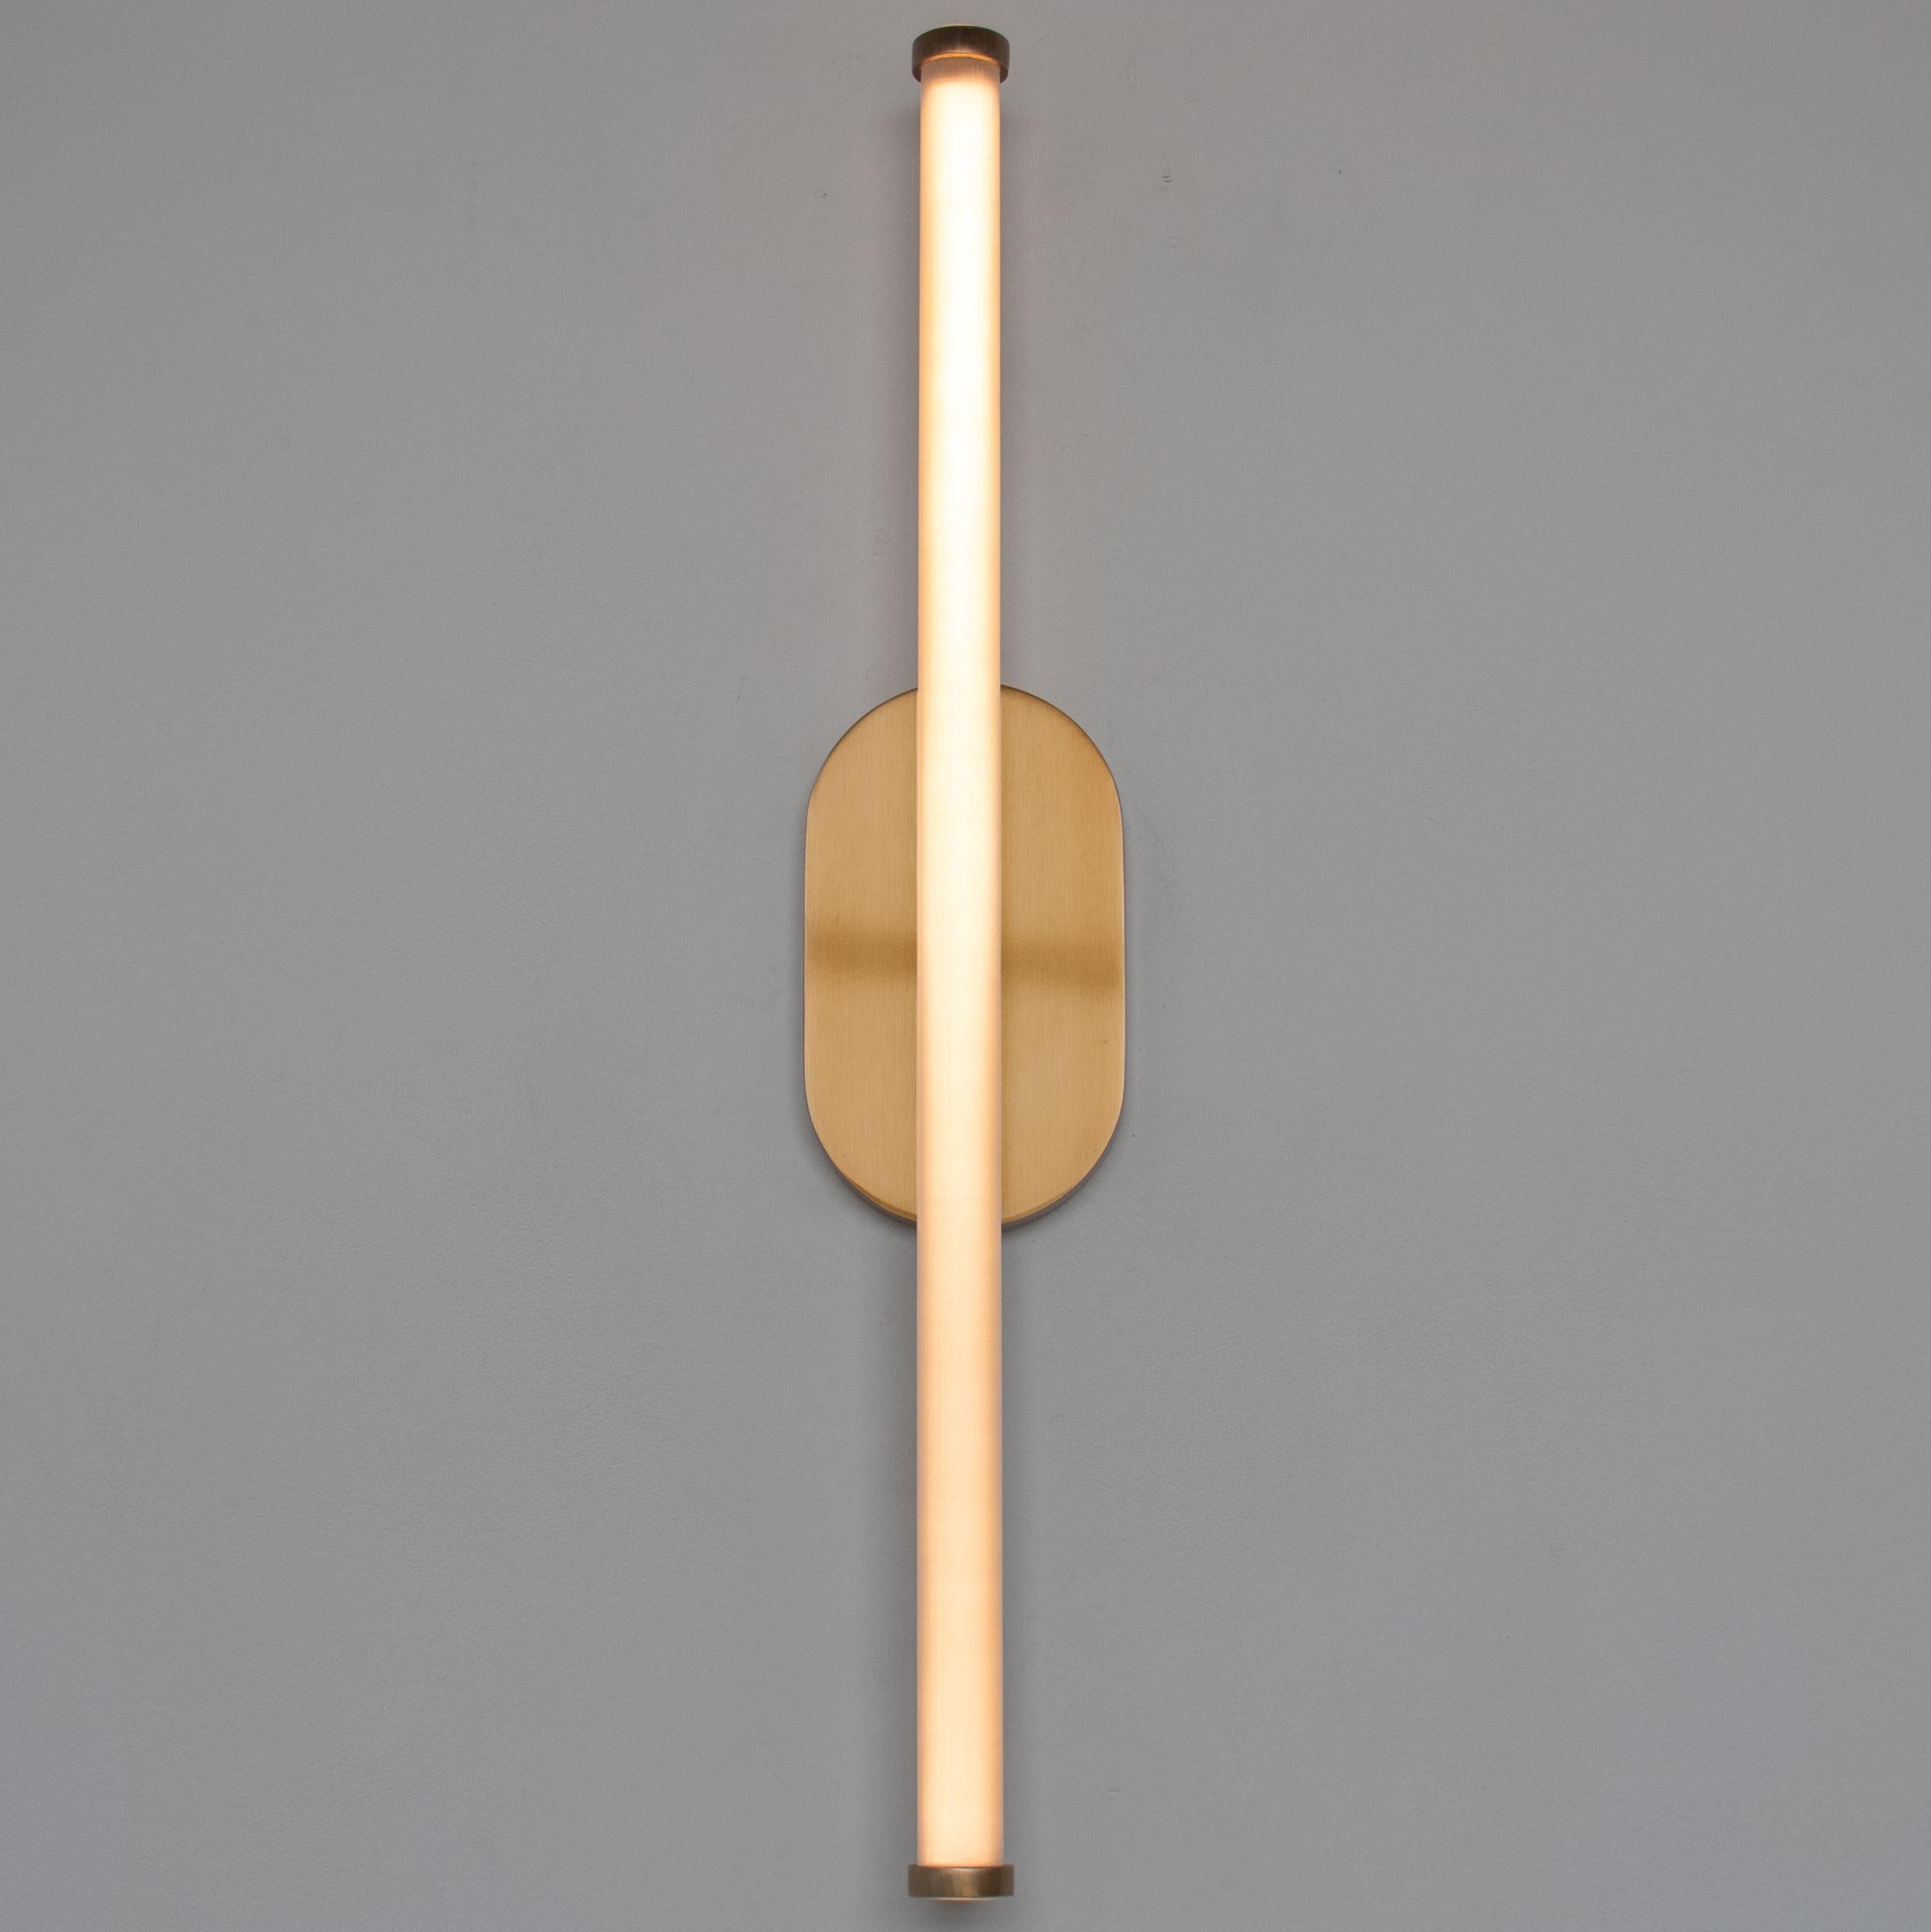 The BEAM Wall Sconce is built from cold-rolled steel, and is diffused by a minimal frosted, 1